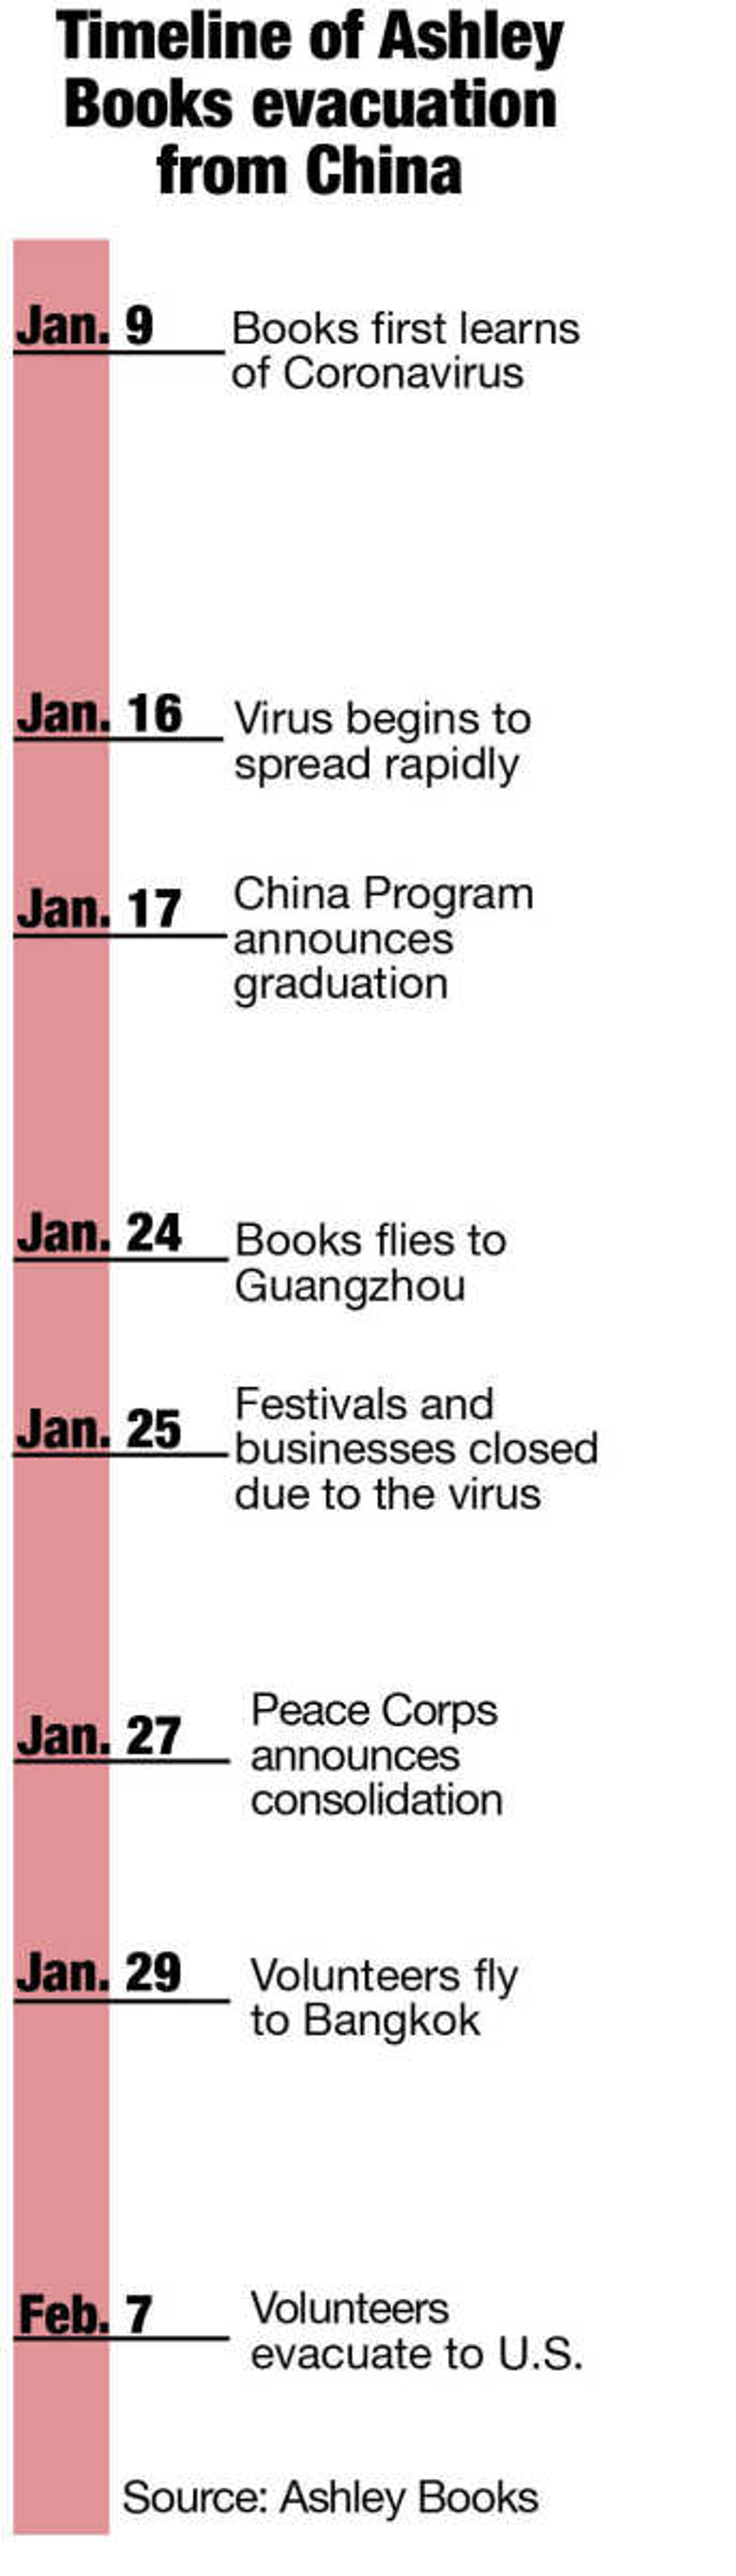 Southeast alumna evacuated, describes fear panic in China during coronavirus outbreak